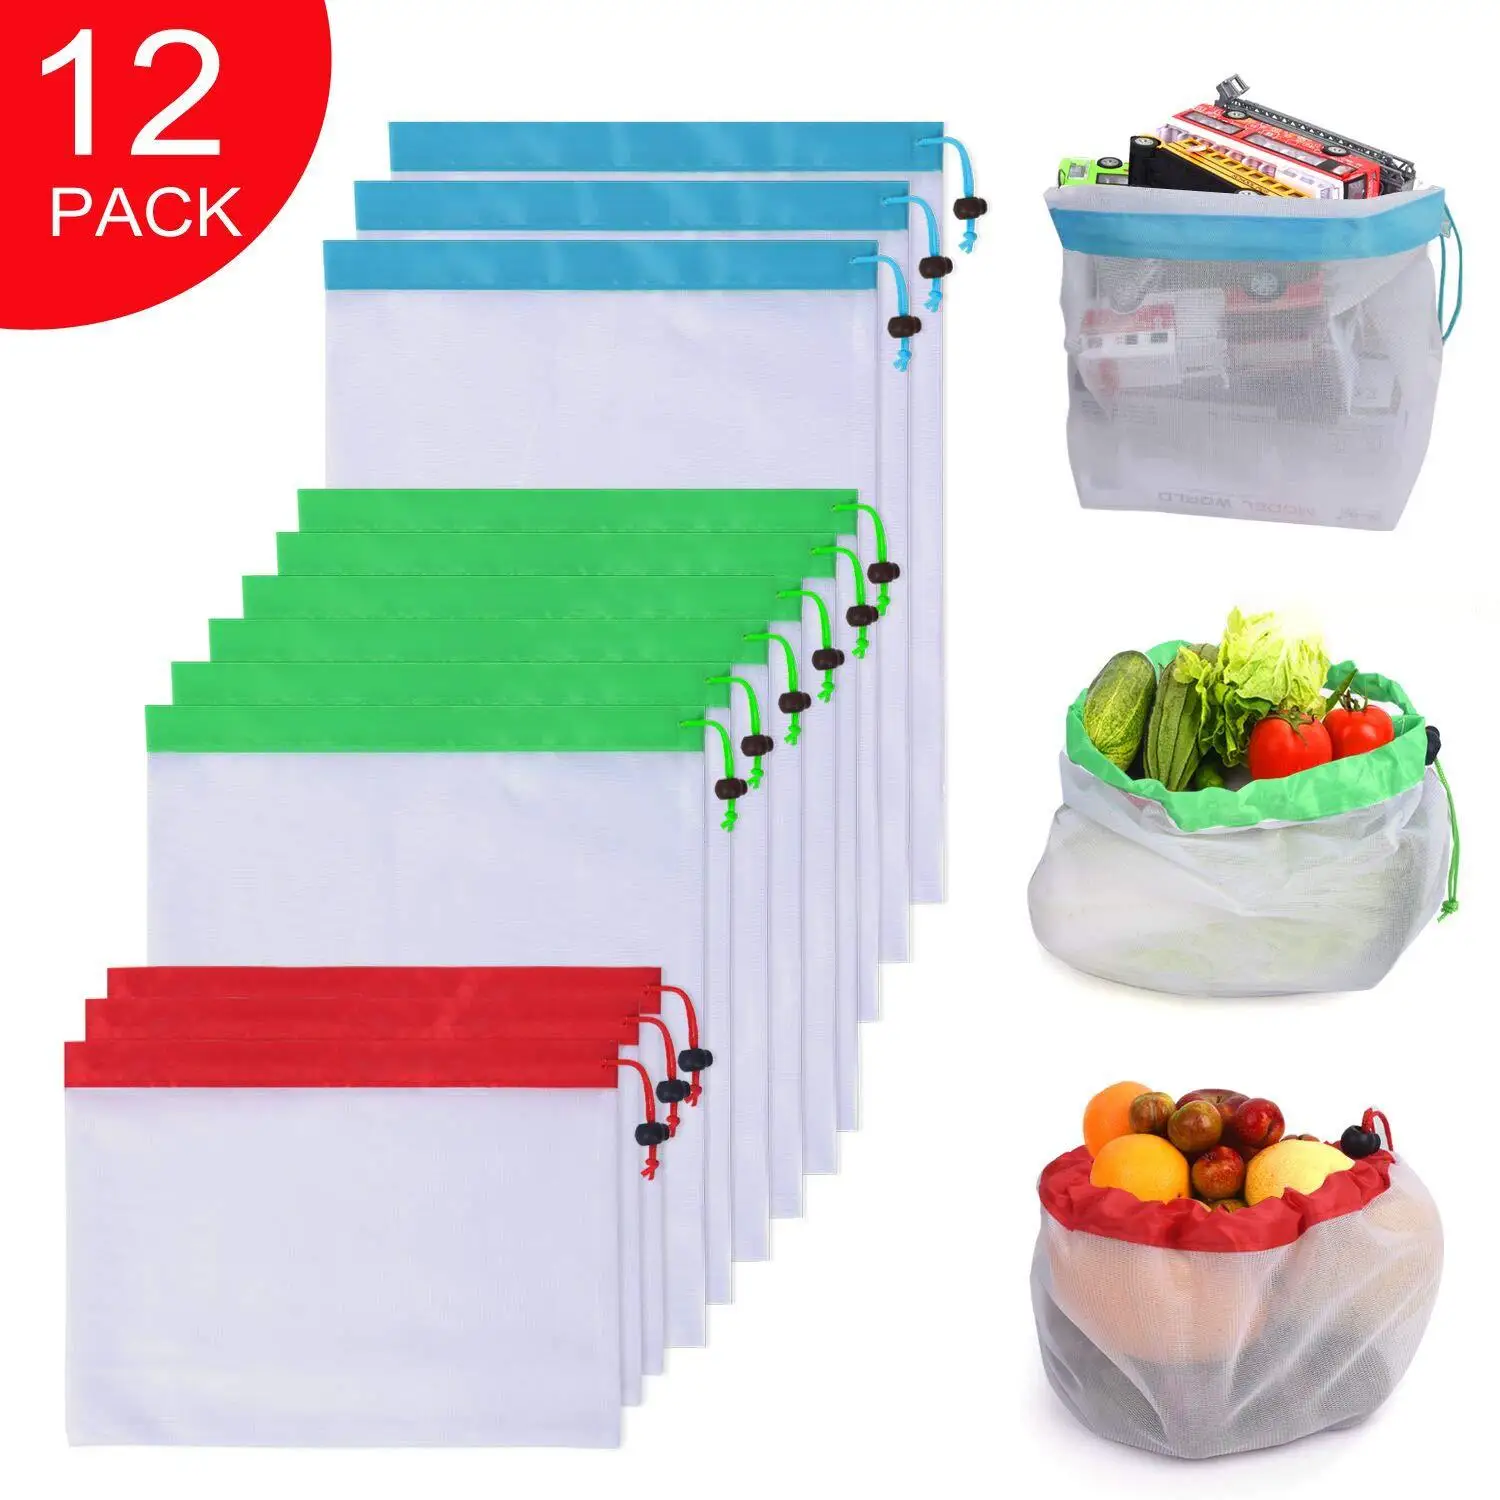 

3 Sizes Reusable Mesh Produce Fruit Bag Washable Eco-Friendly Bags for Grocery Shopping Storage Vegetable Toys Sundries Bag